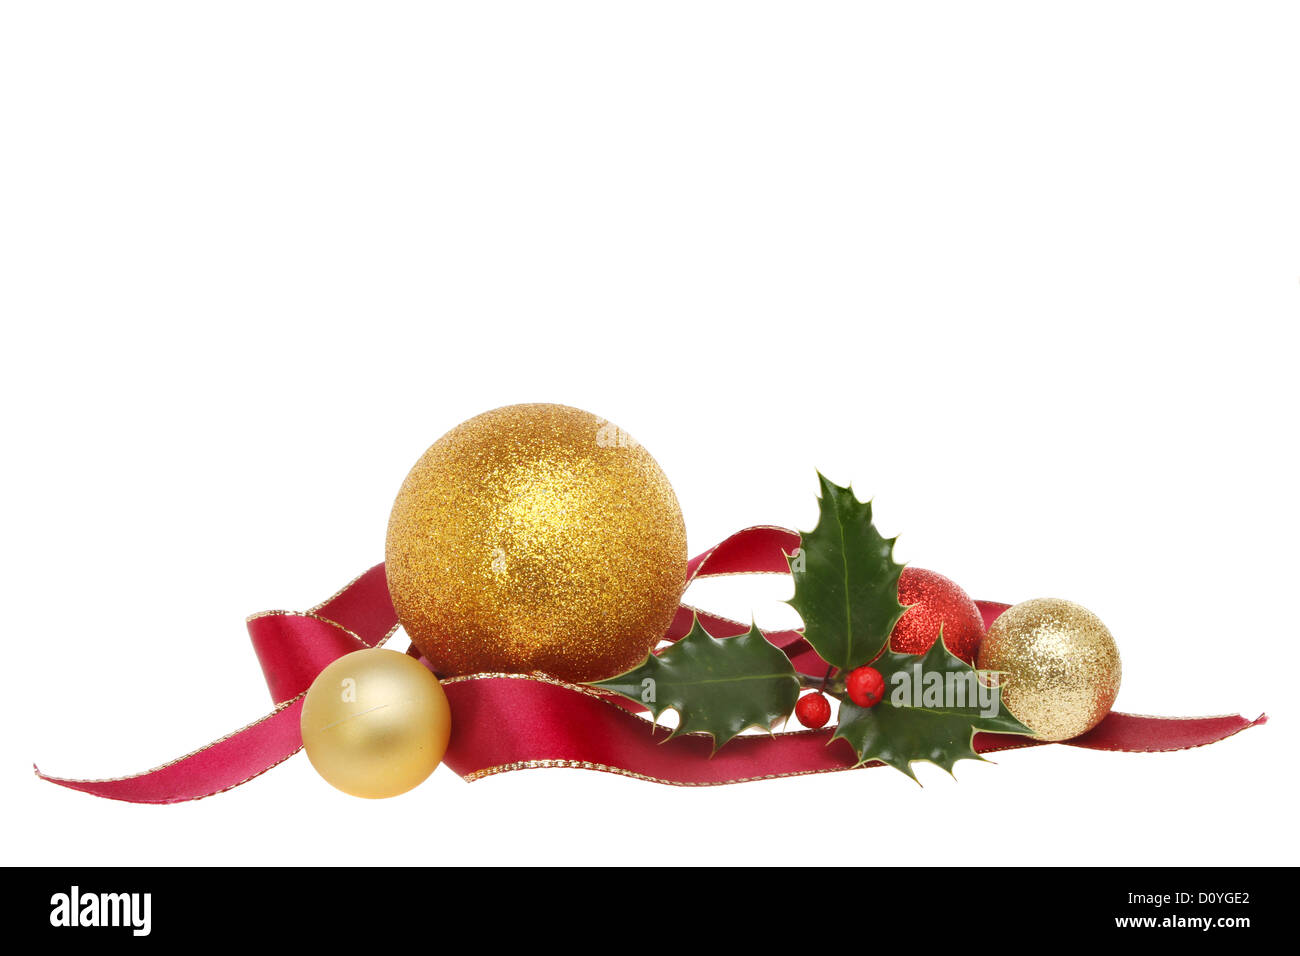 Ribbon, bauble and holly Christmas decoration isolated against white Stock Photo